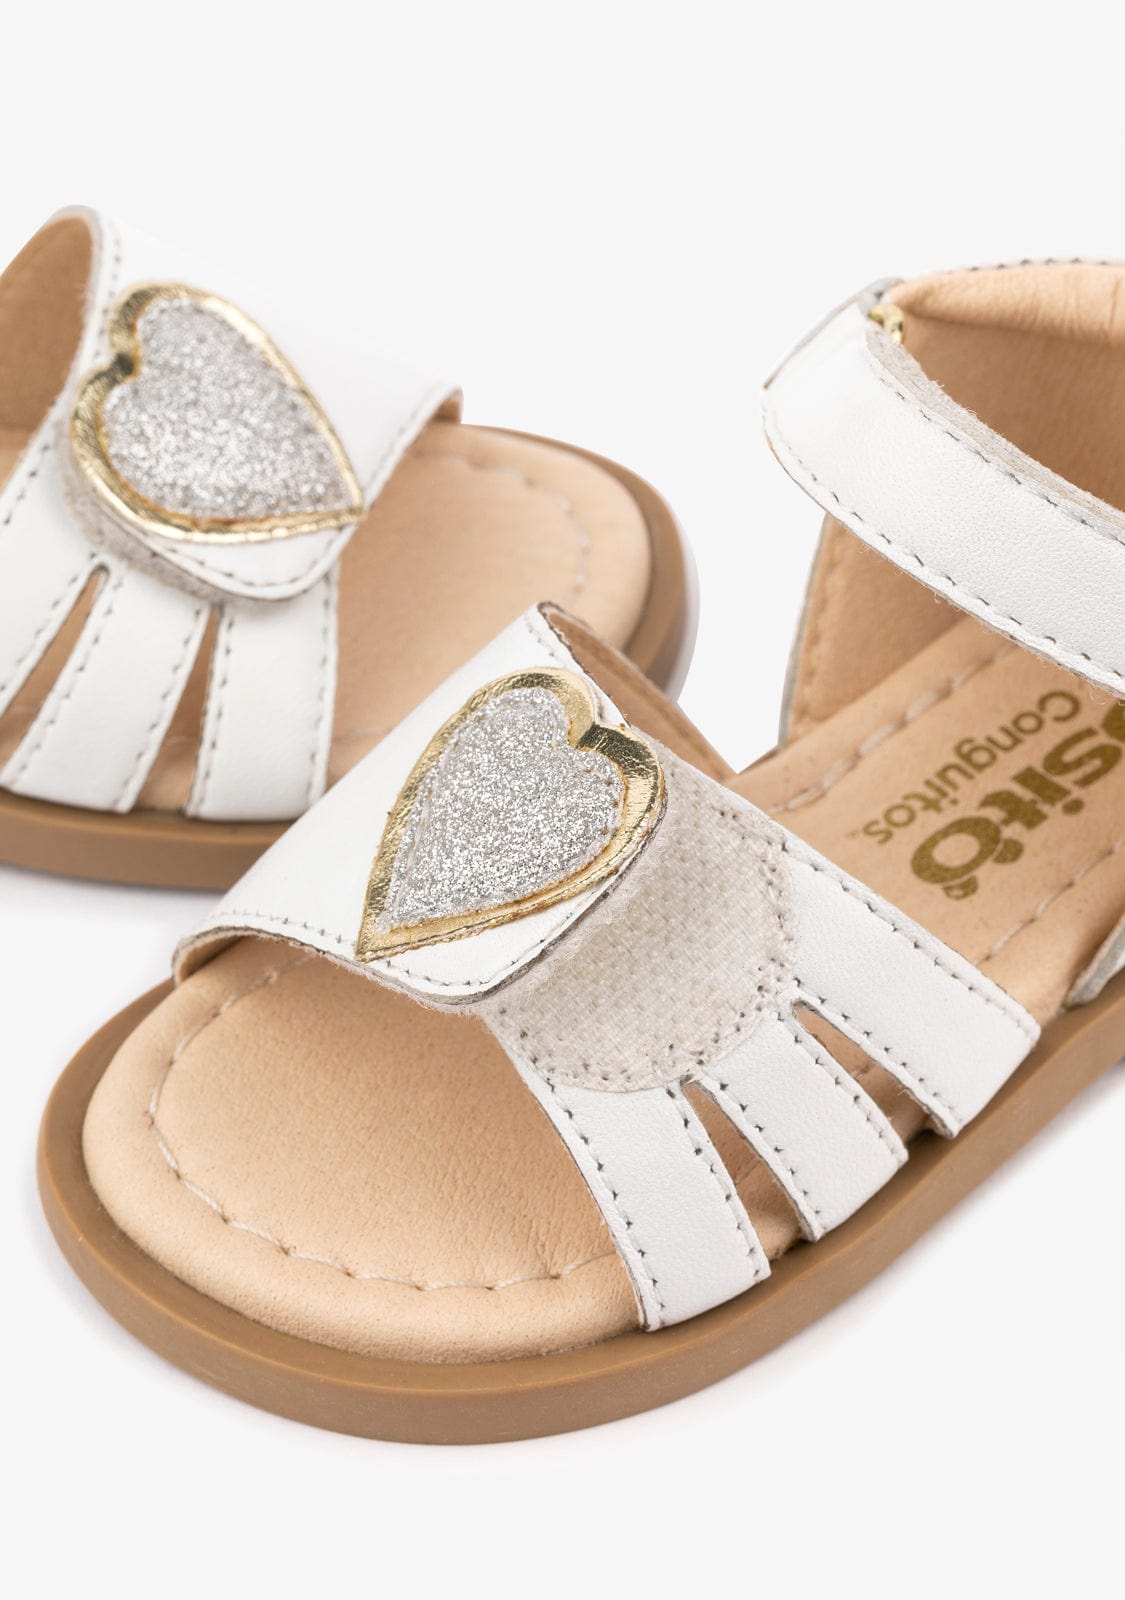 OSITO Shoes Baby's White Heart Sandals Napa